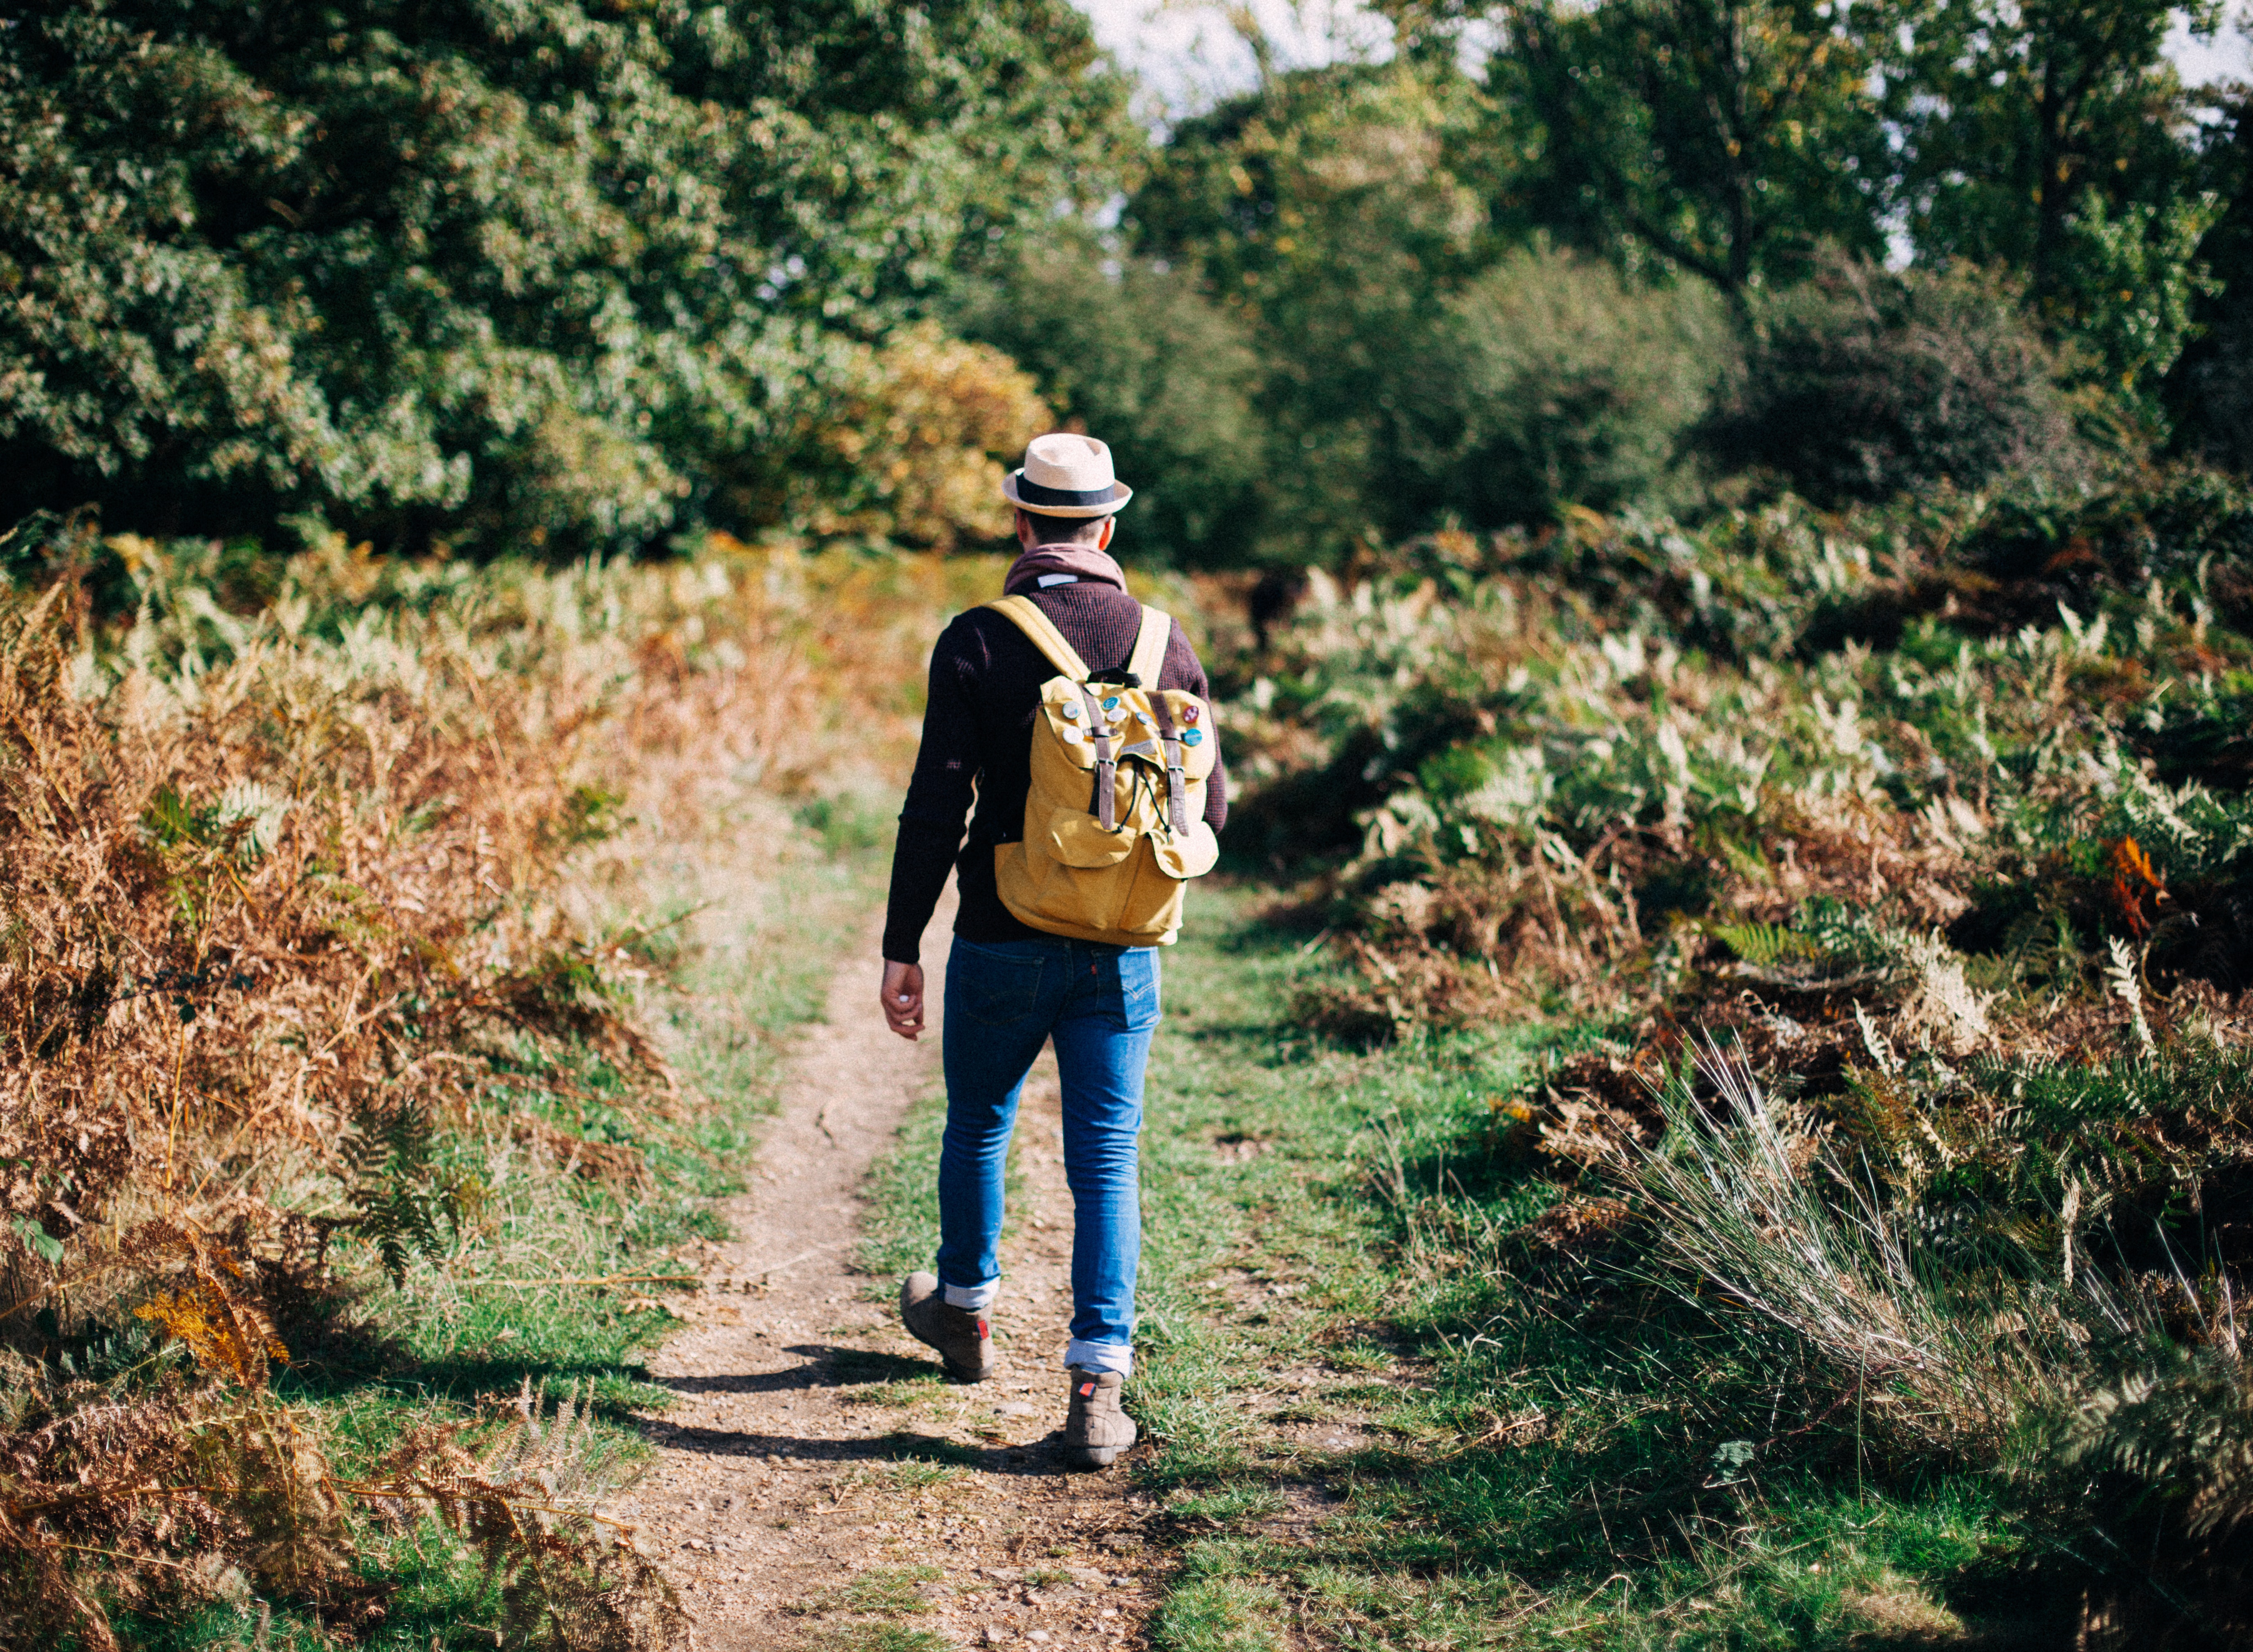 A man wearing a hat and rucksack walking in the countryside